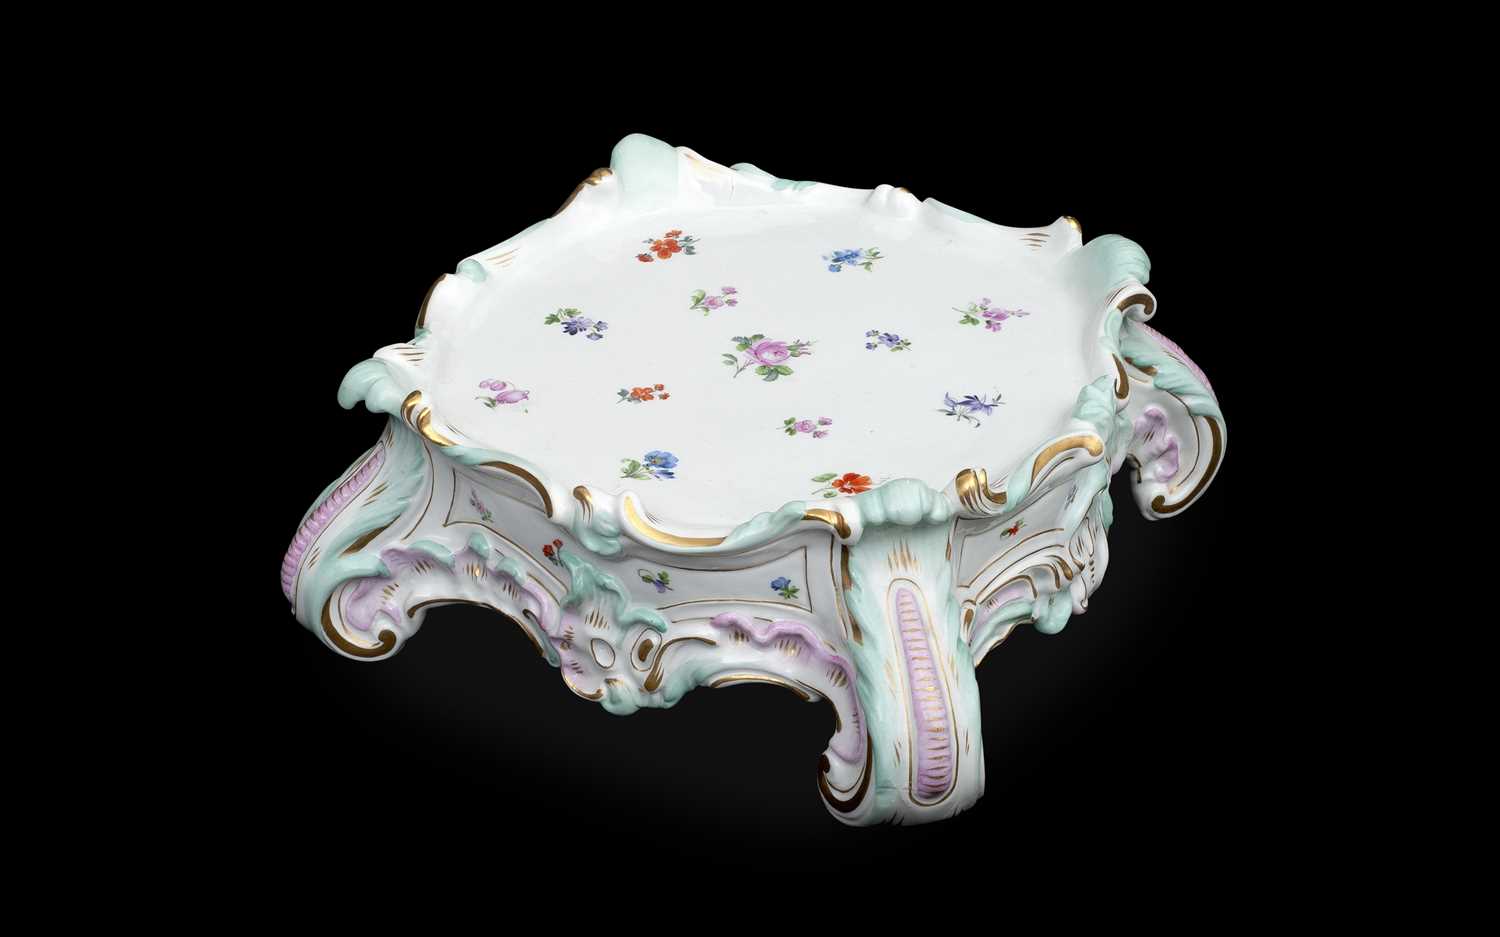 A FINE MONUMENTAL FLOWER ENCRUSTED MEISSEN VASE AND COVER, LATE 19TH / EARLY 20TH CENTURY - Image 6 of 10